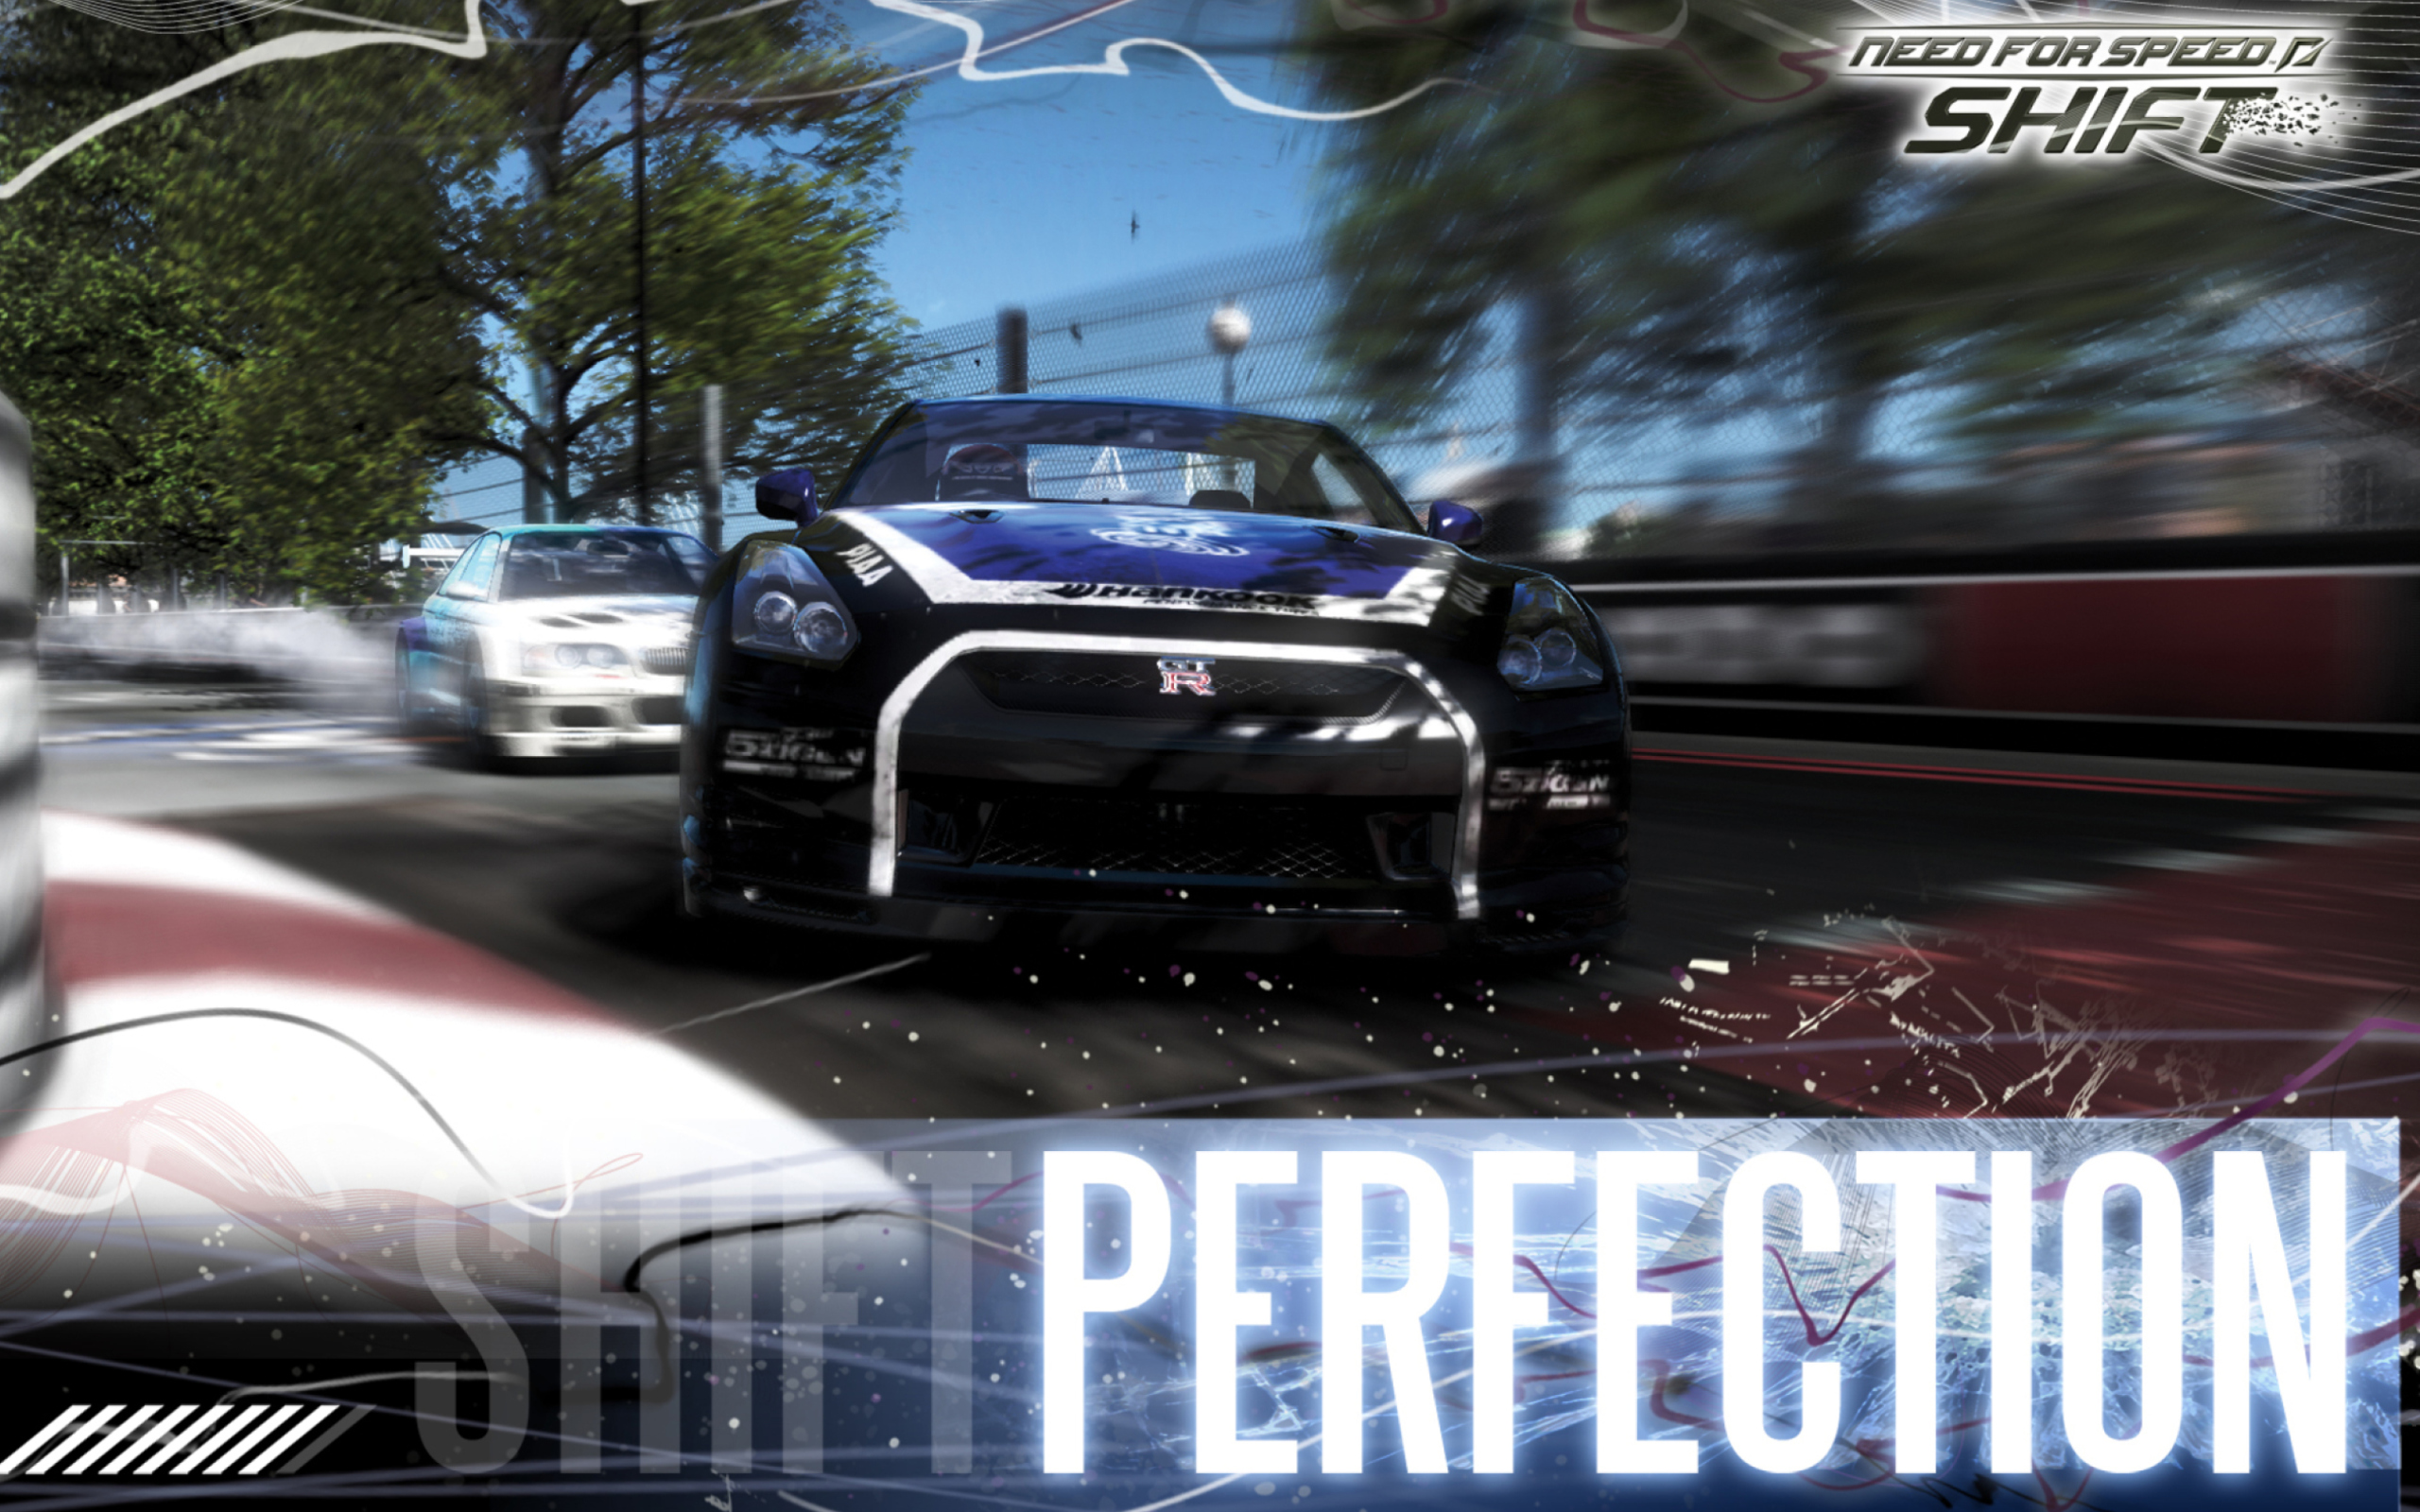 Das Need for Speed: Shift Wallpaper 2560x1600